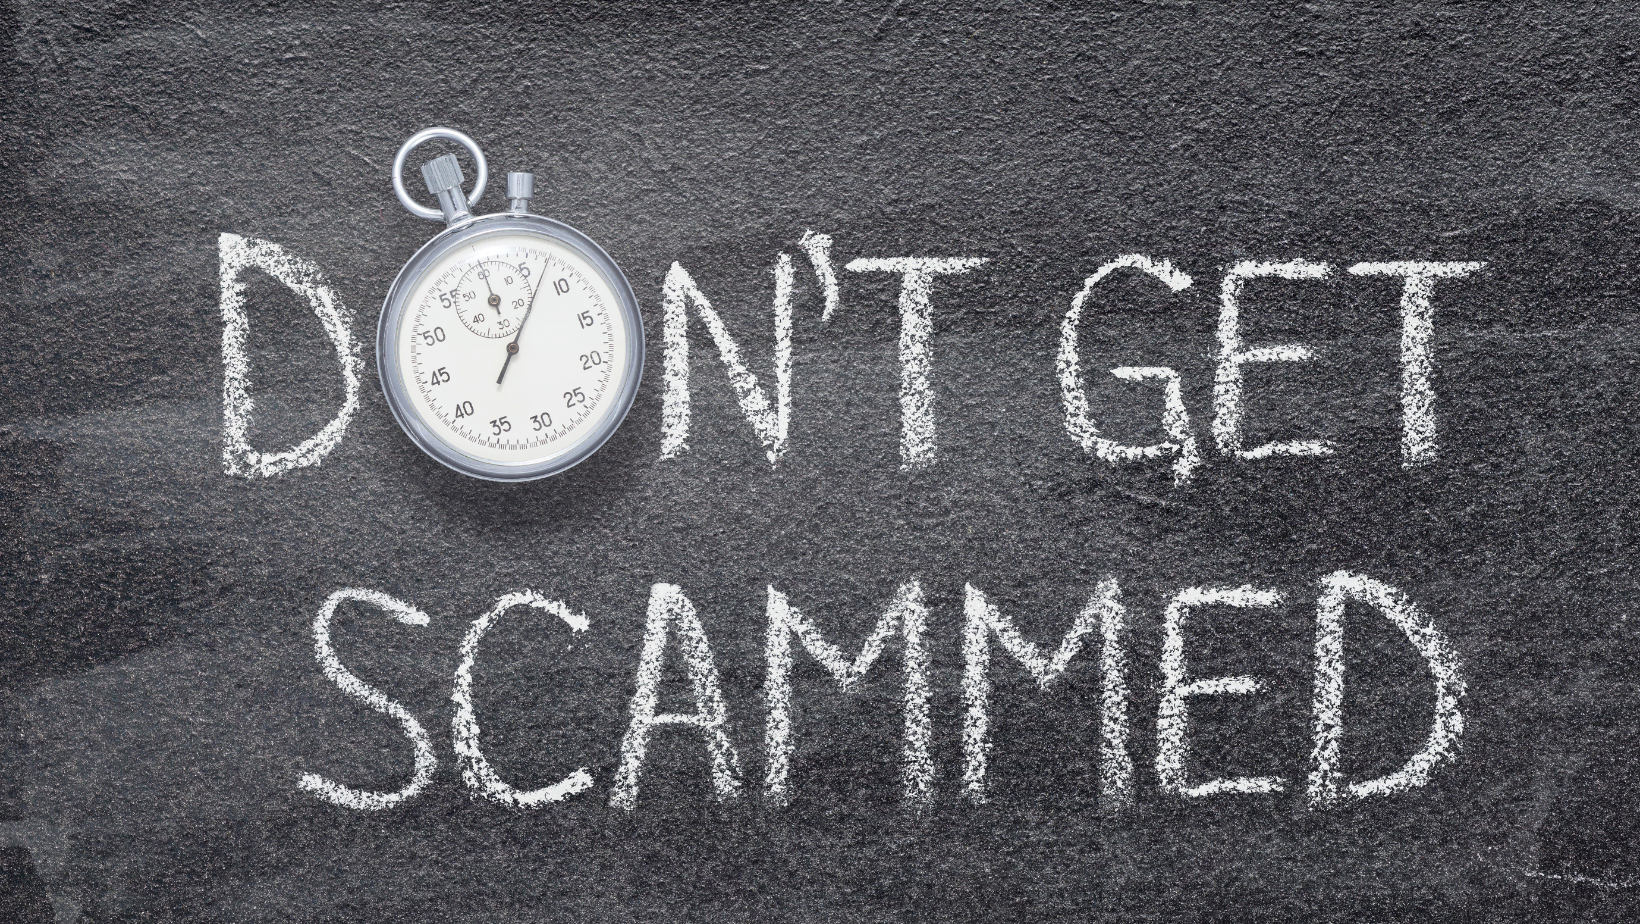 Not only with forex brokers, but in life in general, it is important to recognize and avoid scam at an early stage.